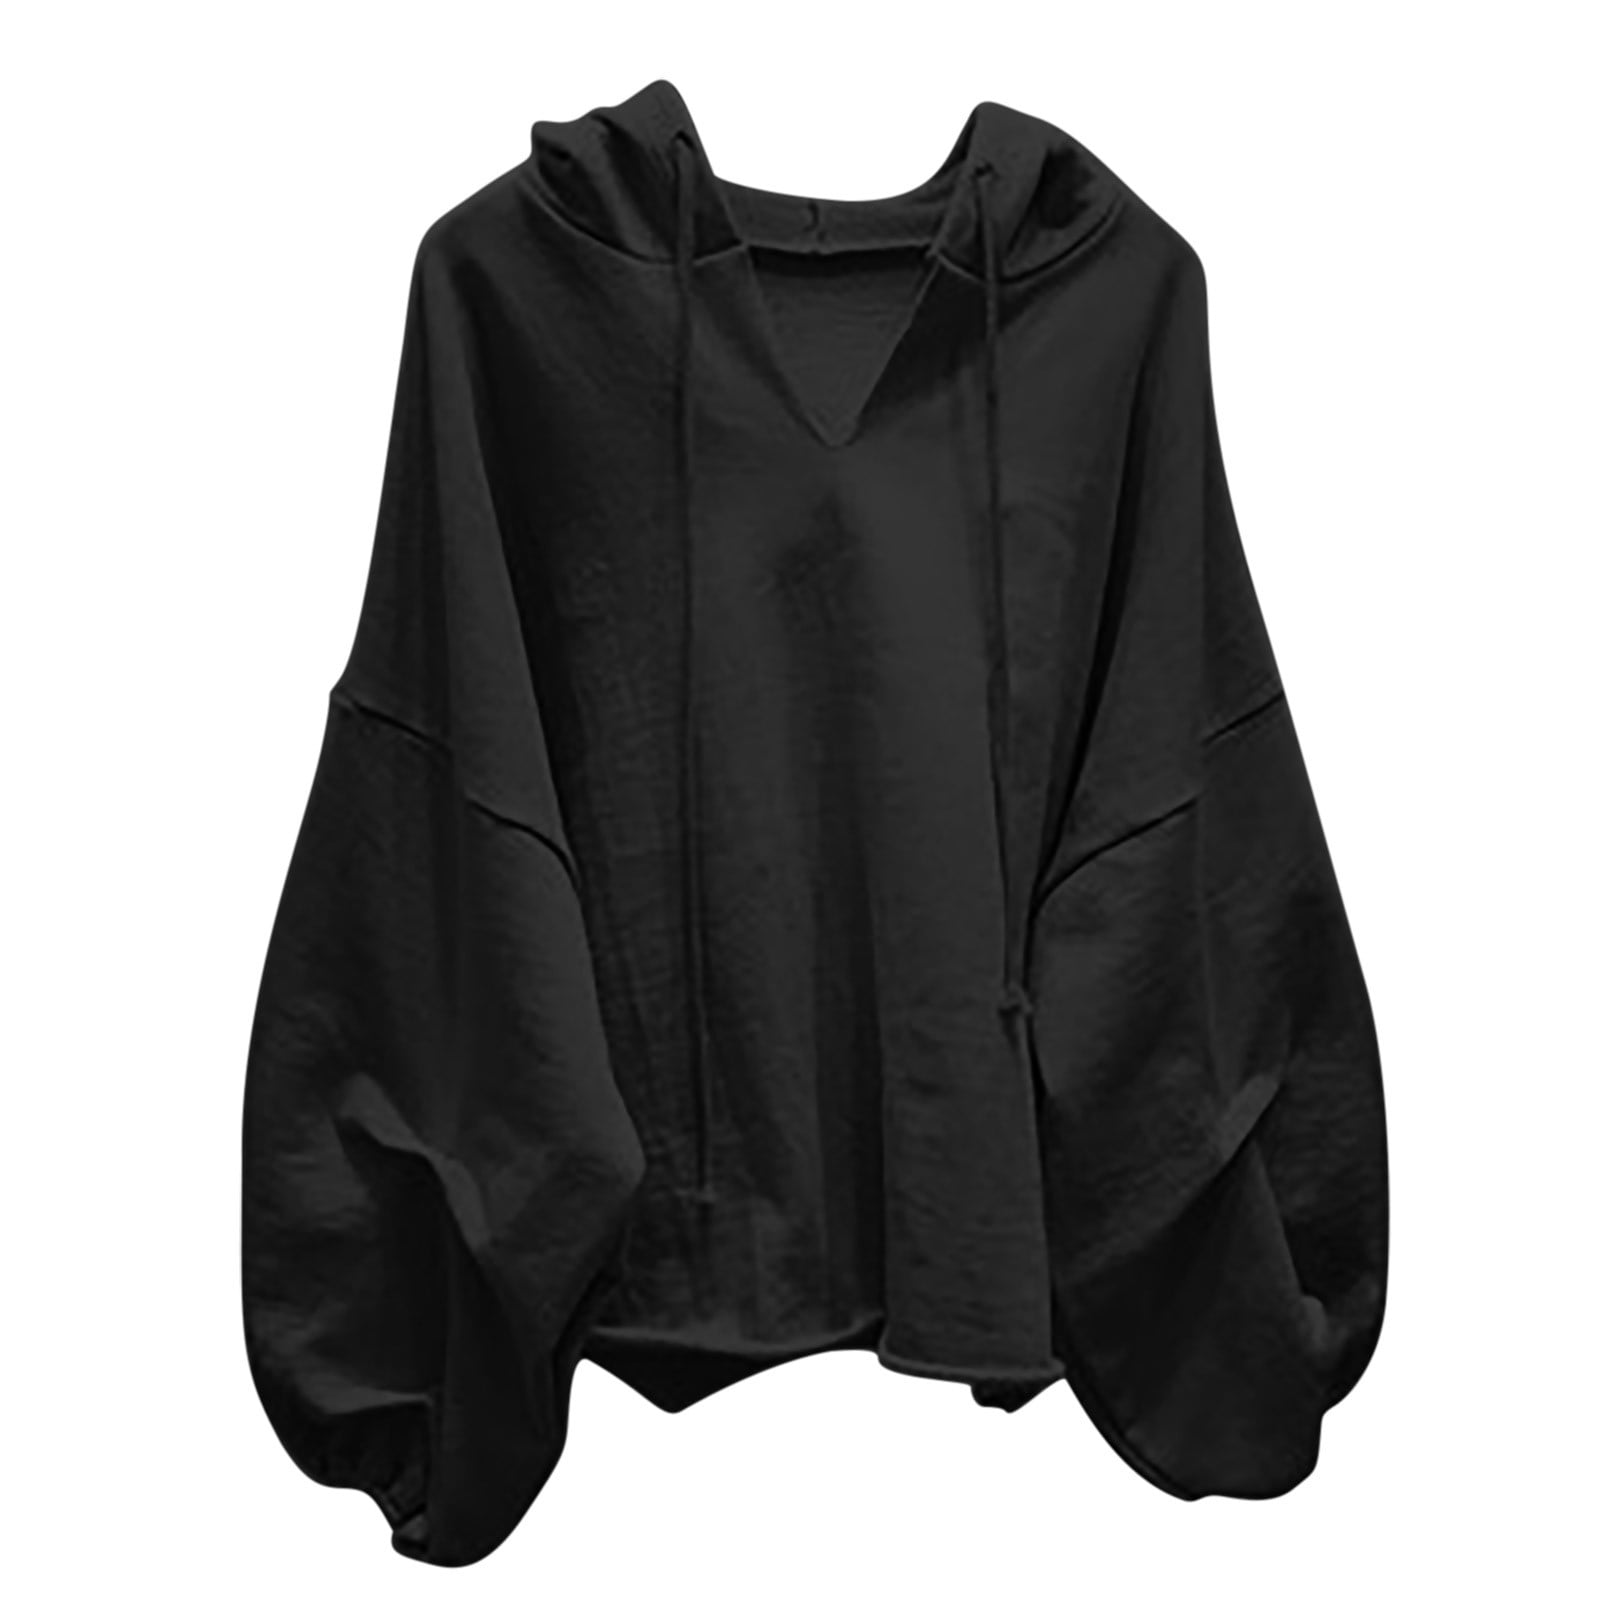 Ollysqiar Women Long Sleeve 3D Printed Lightweight Hoodies Drawstring  Sweatshirts,things for 1 dollar,overstock deals,my lists on my account my  wish list,next day delivery items